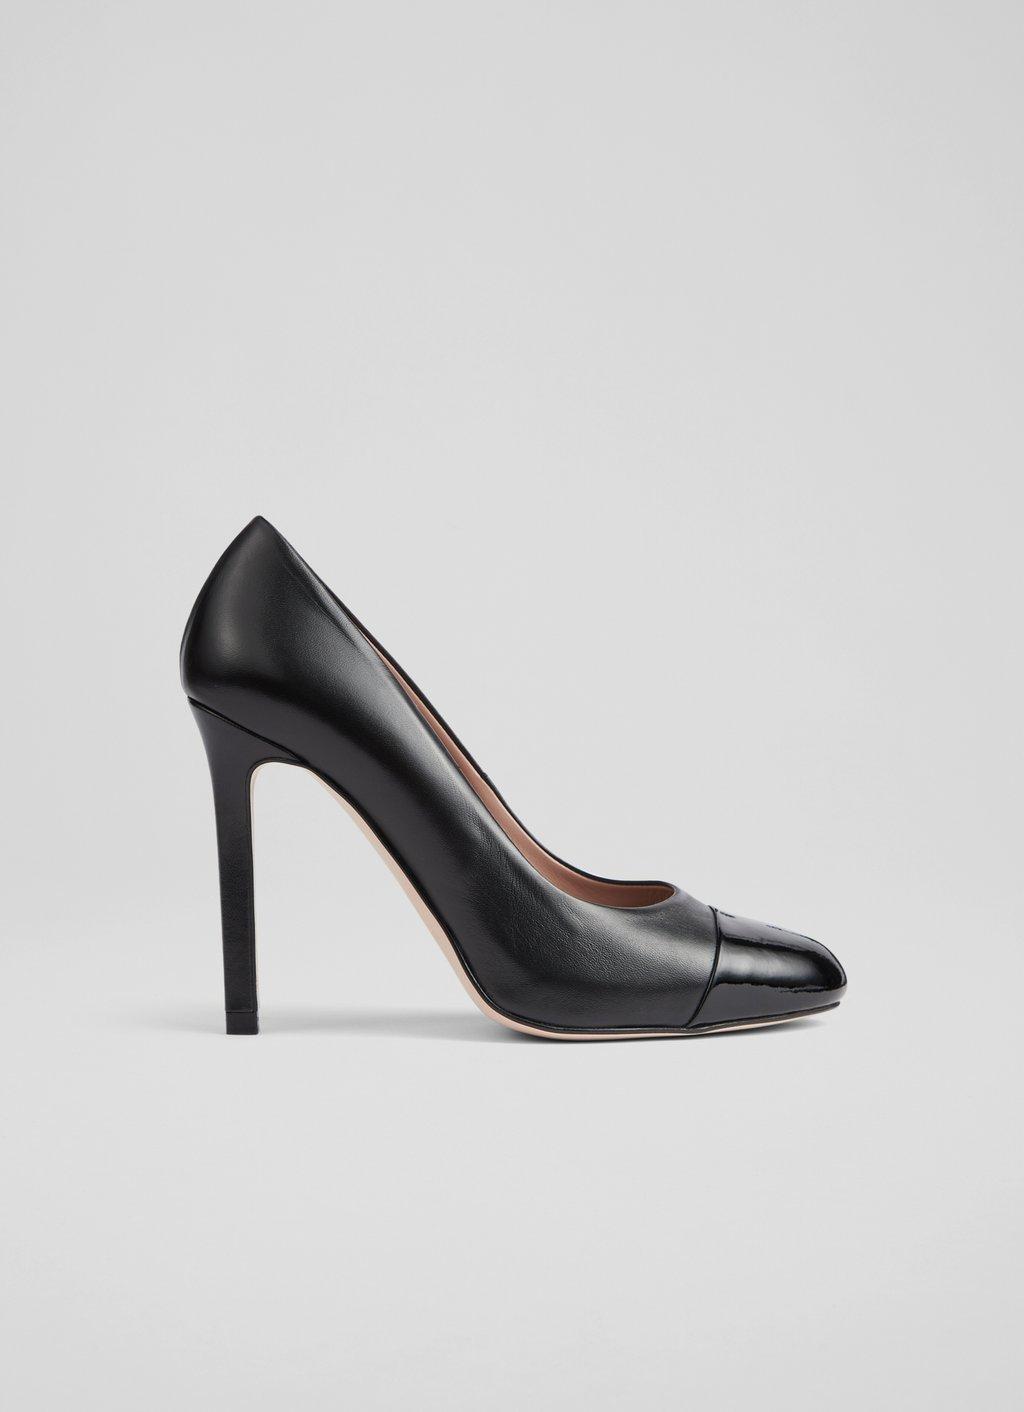 Monroe Black Patent Leather Pointed Toe Courts, Shoes, Collections